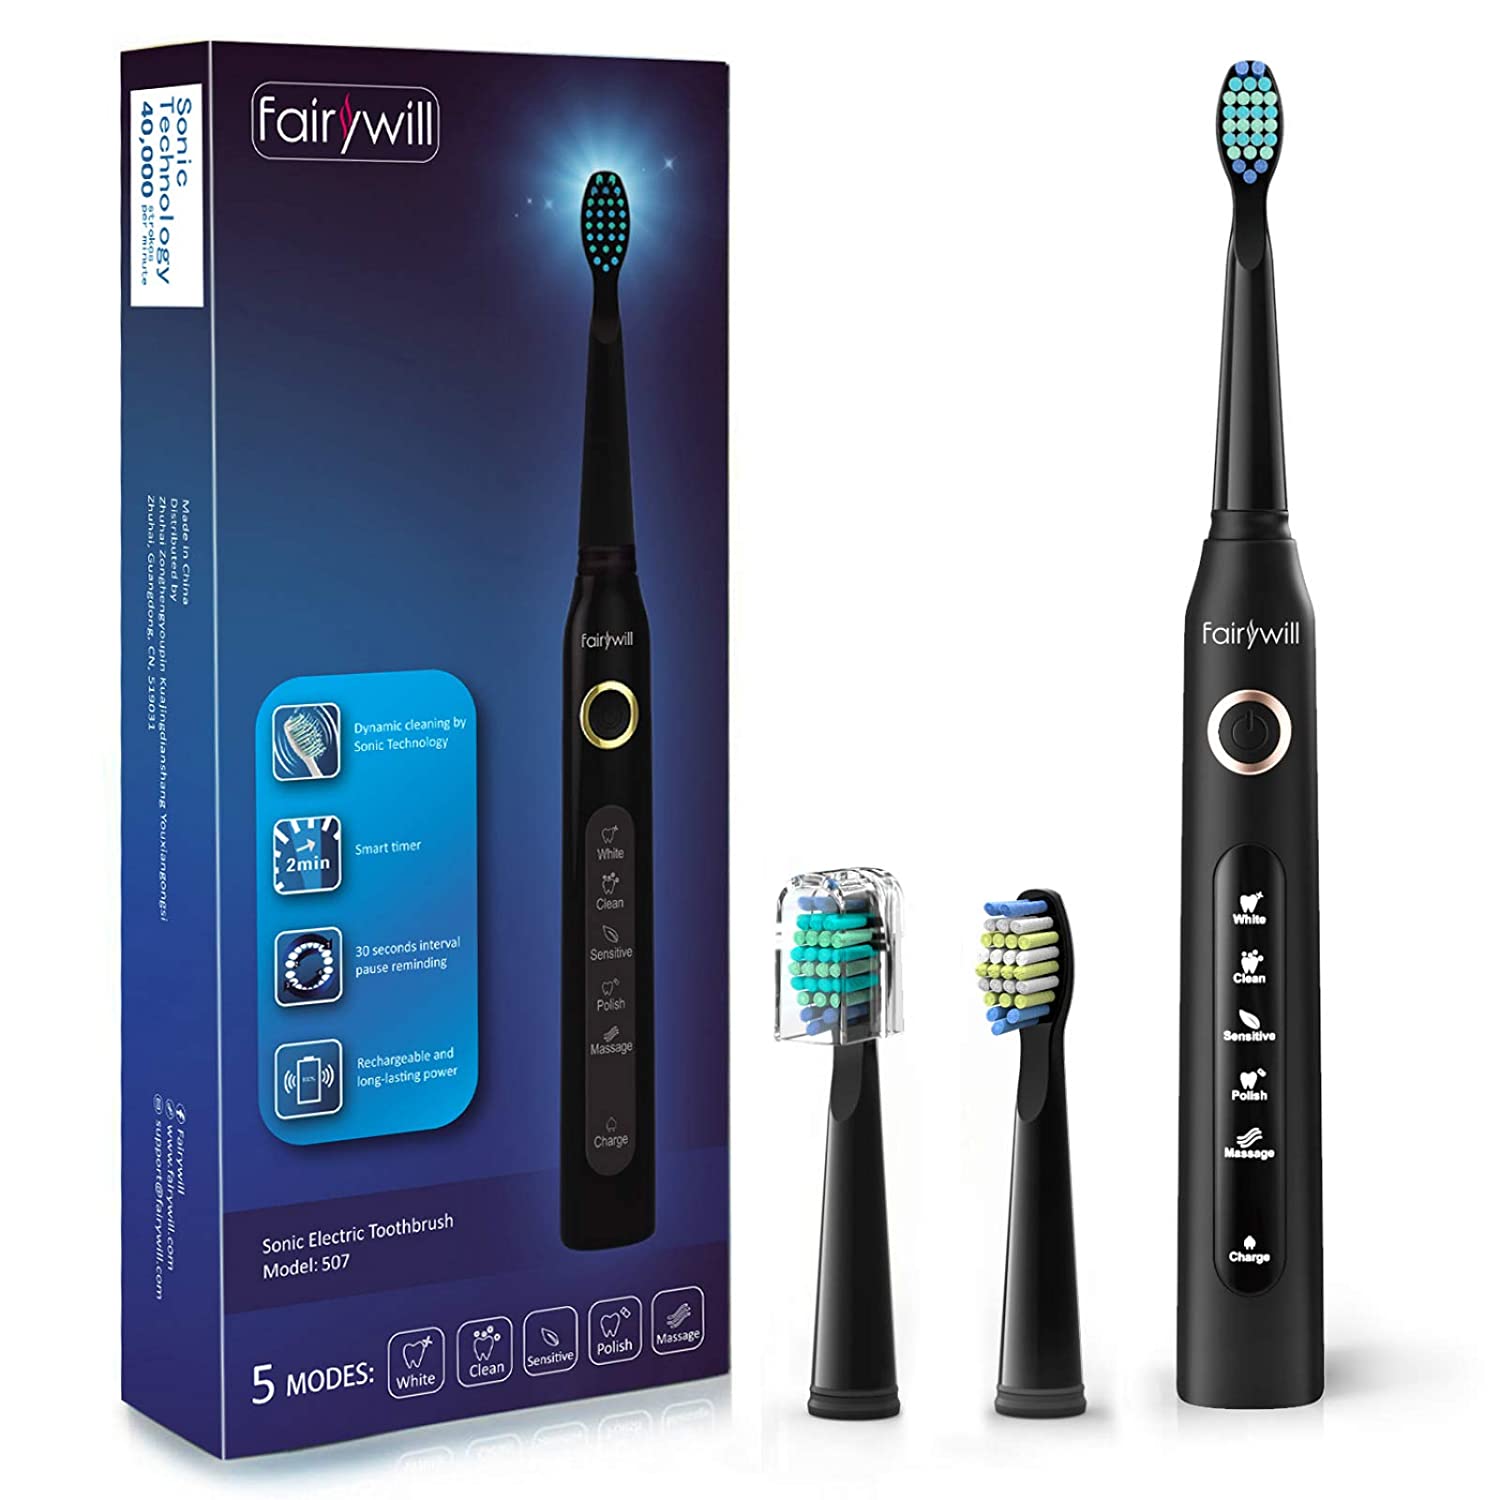 Fairywill Electric Toothbrush 507 Powerful Sonic